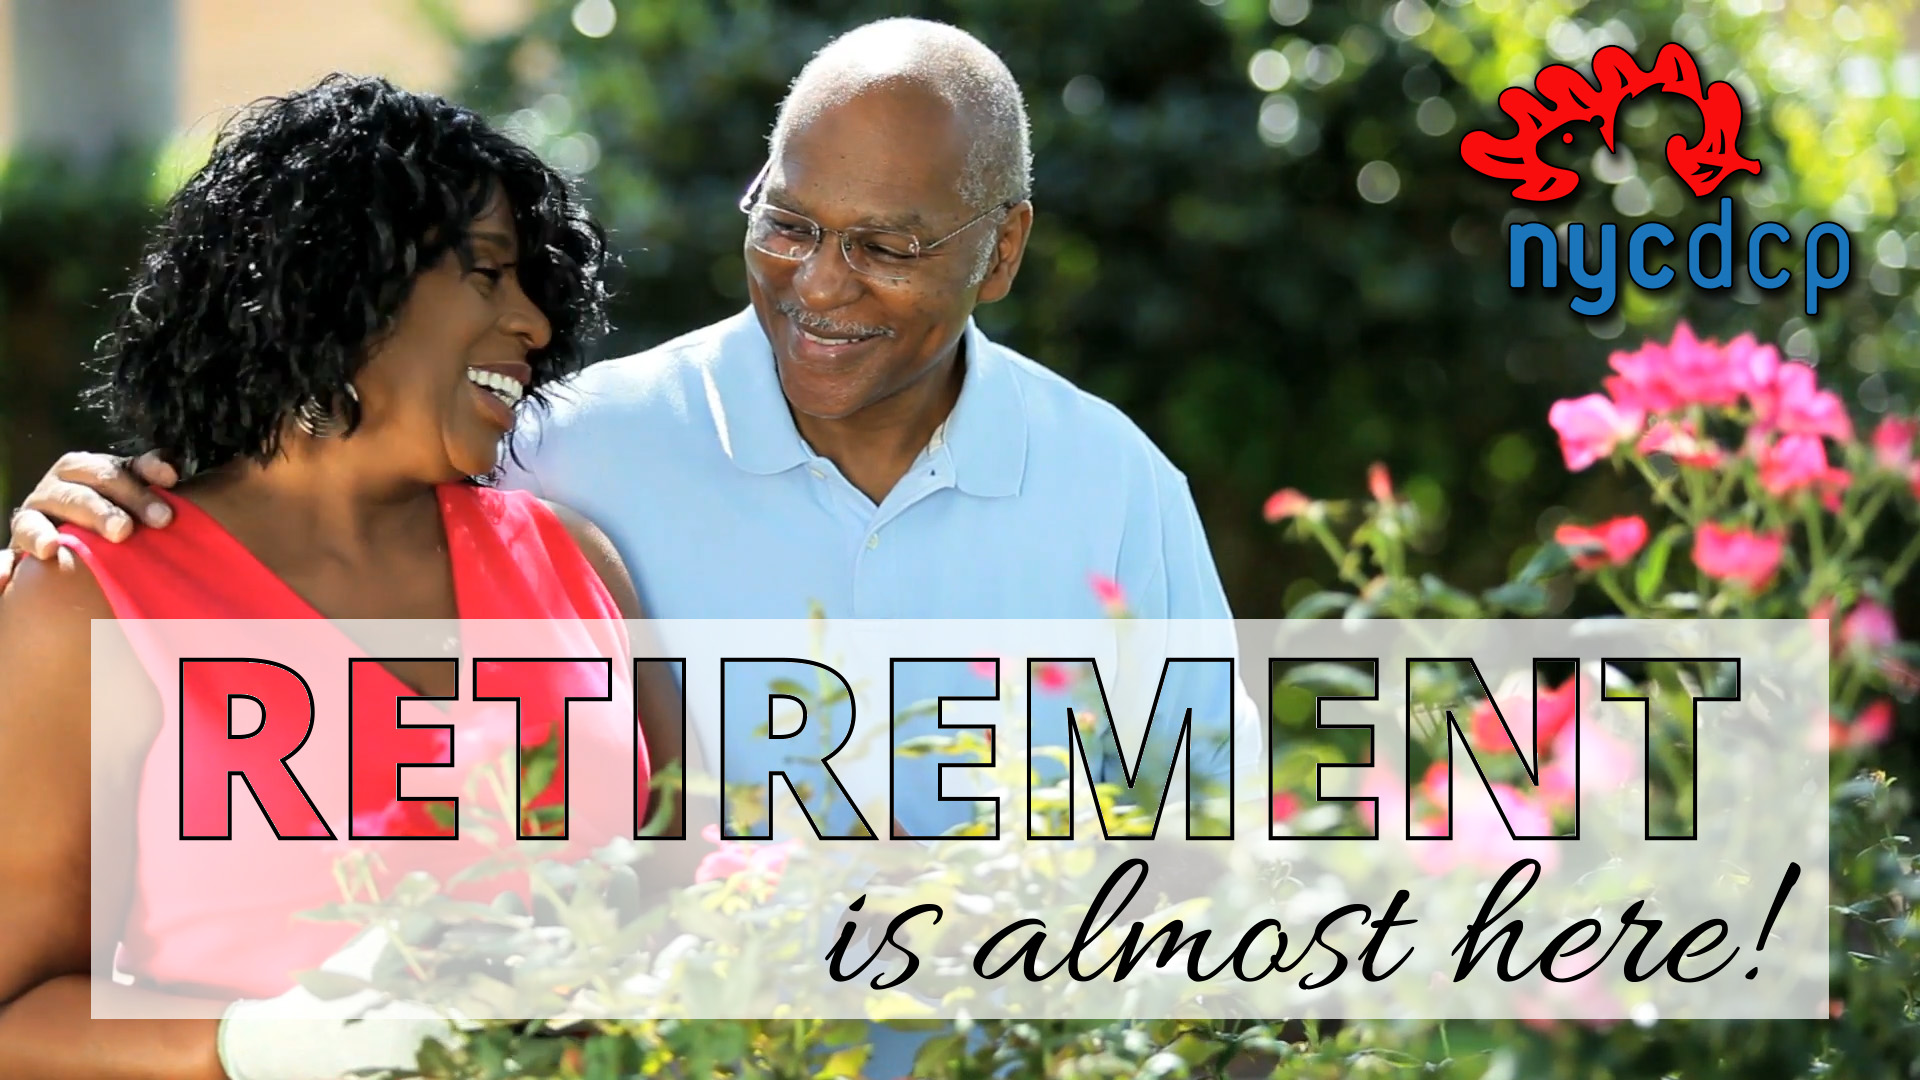 Retirement is Almost Here